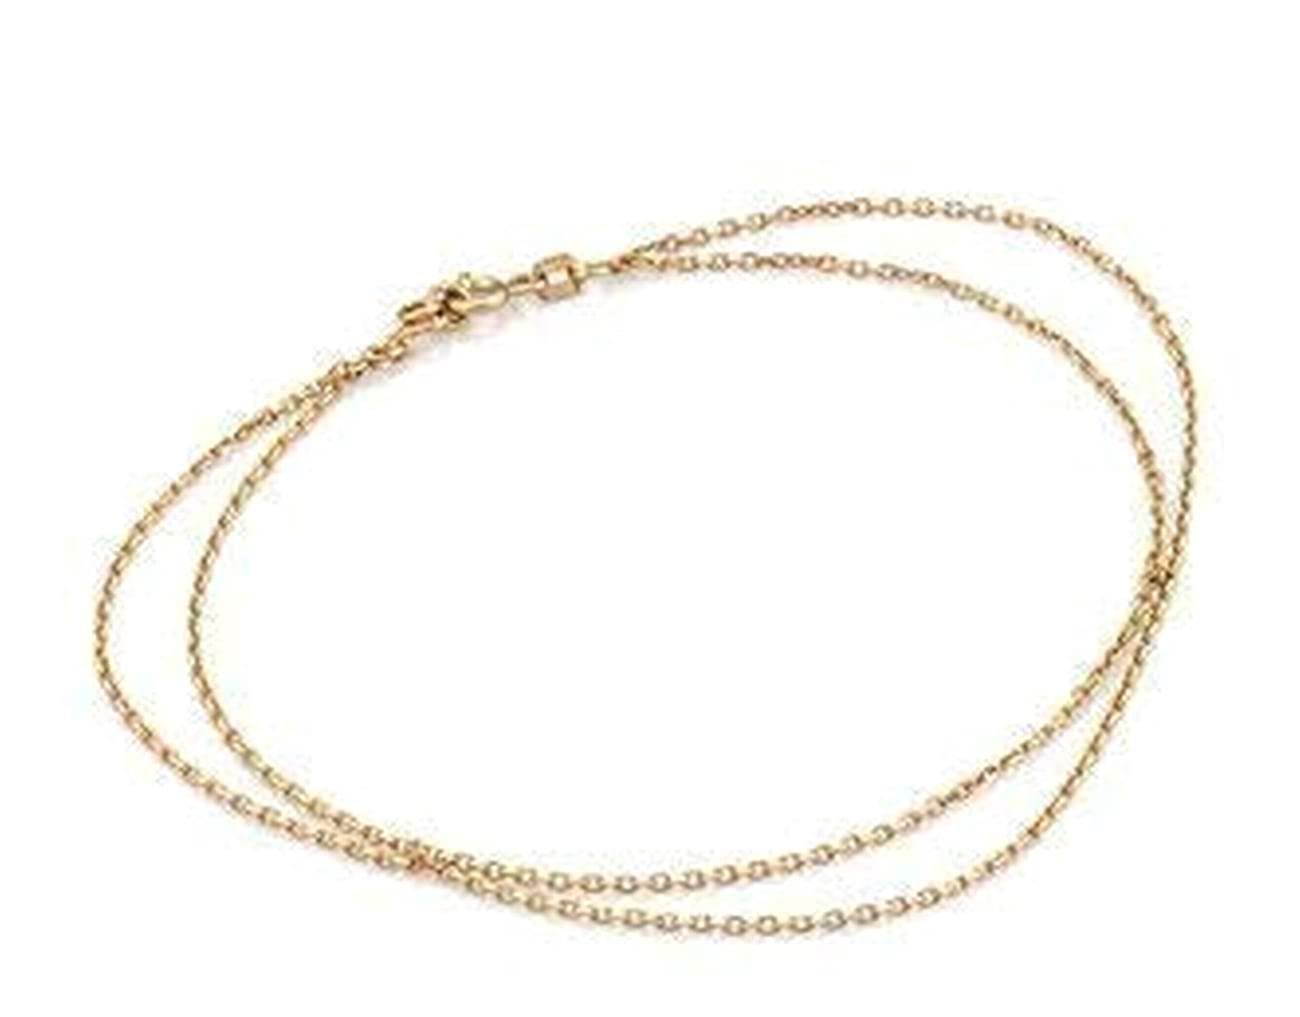 14K Gold Double Chain Anklet, Double Strand Gold Chain Anklet, Plain Gold Anklet, Gold Link Chain Body Jewelry for Women Girls